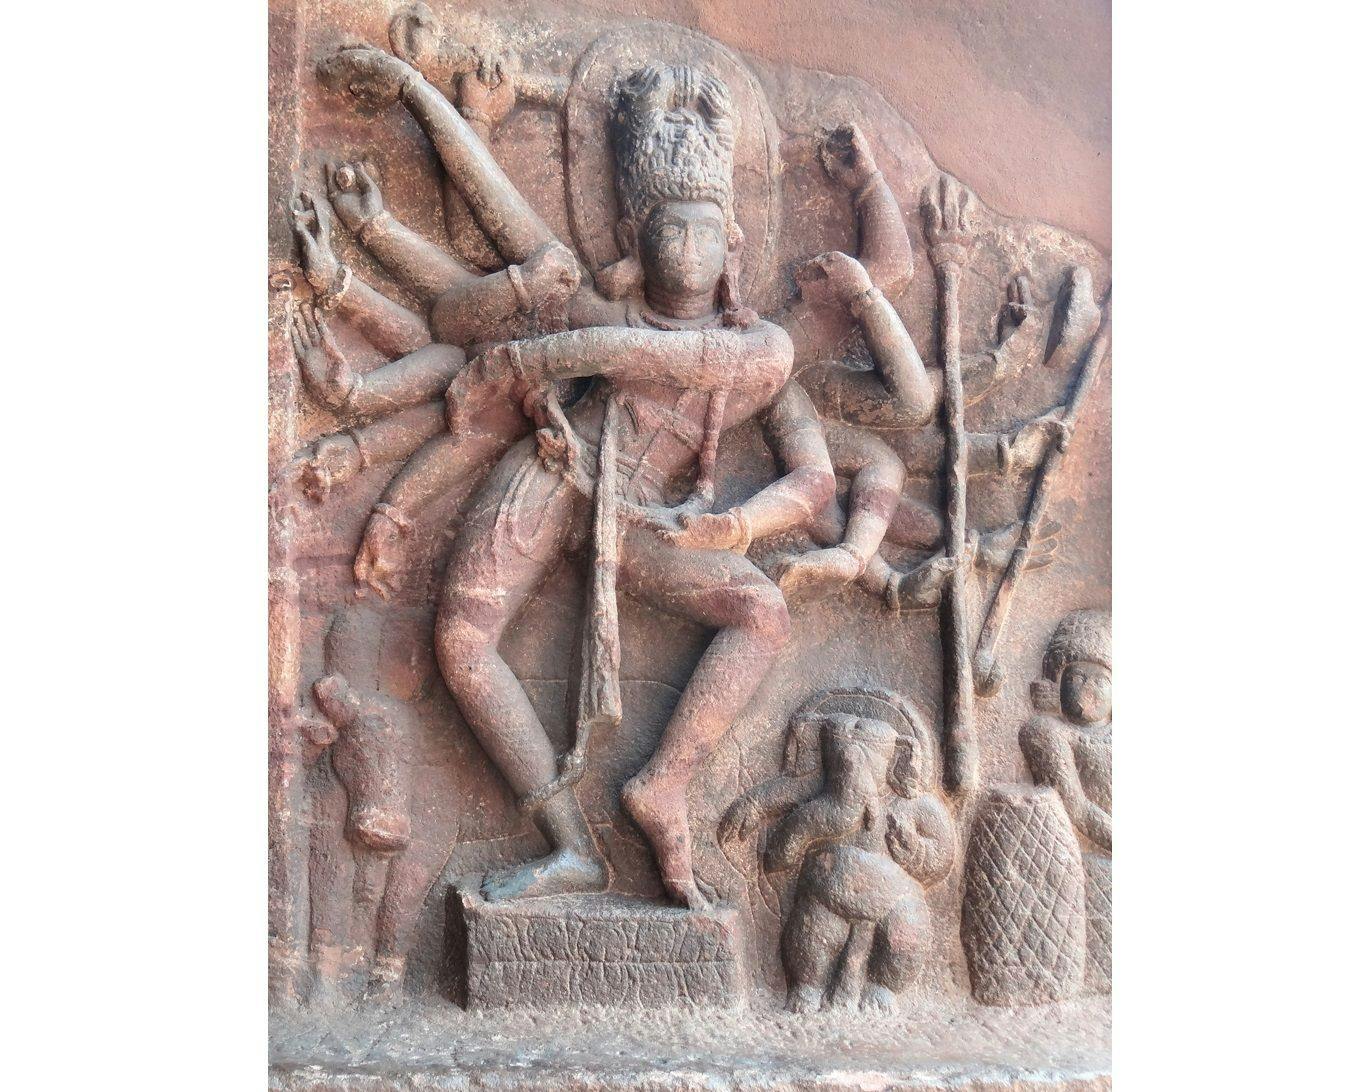 The Natyashastra influenced other arts in ancient and medieval India. The dancing Shiva sculpture in Badami cave temples (6th–7th century CE), for example, illustrates its dance movements and Lalatatilakam pose